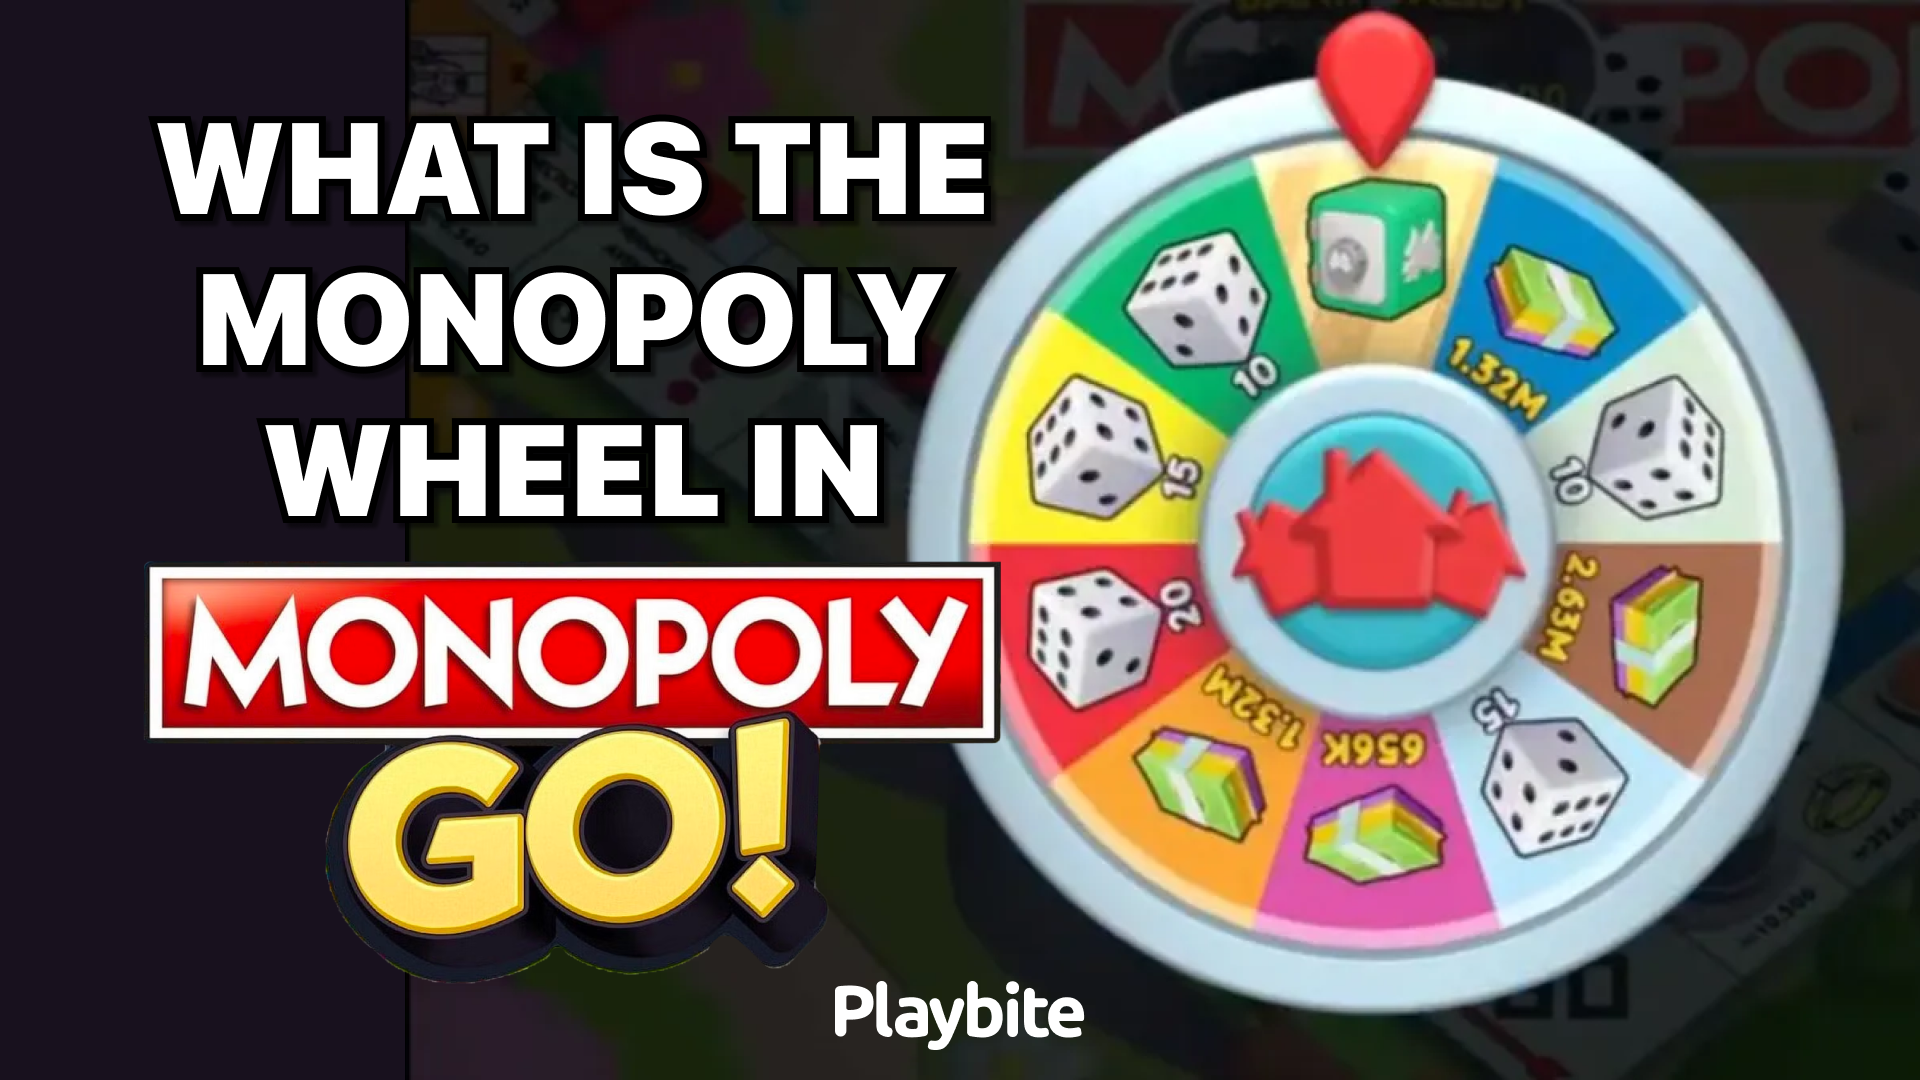 What Is The Monopoly Wheel In Monopoly GO!